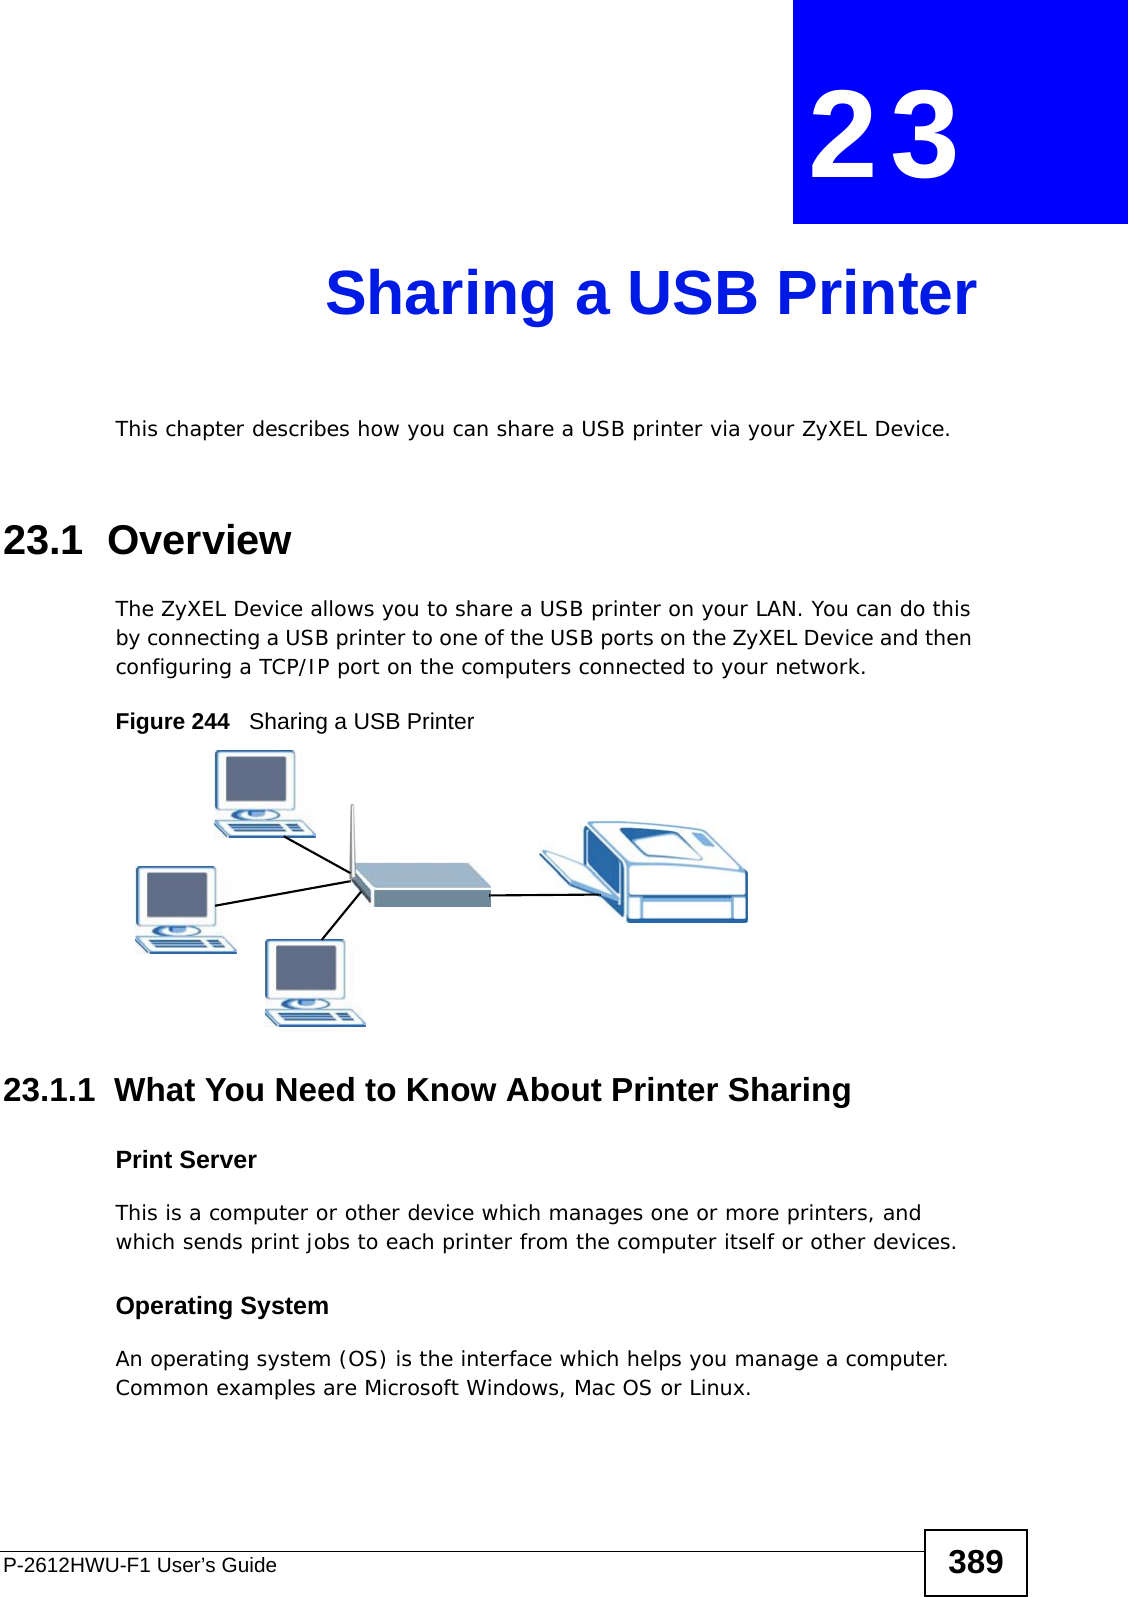 P-2612HWU-F1 User’s Guide 389CHAPTER  23 Sharing a USB PrinterThis chapter describes how you can share a USB printer via your ZyXEL Device. 23.1  OverviewThe ZyXEL Device allows you to share a USB printer on your LAN. You can do this by connecting a USB printer to one of the USB ports on the ZyXEL Device and then configuring a TCP/IP port on the computers connected to your network. Figure 244   Sharing a USB Printer23.1.1  What You Need to Know About Printer SharingPrint ServerThis is a computer or other device which manages one or more printers, and which sends print jobs to each printer from the computer itself or other devices.Operating SystemAn operating system (OS) is the interface which helps you manage a computer. Common examples are Microsoft Windows, Mac OS or Linux.